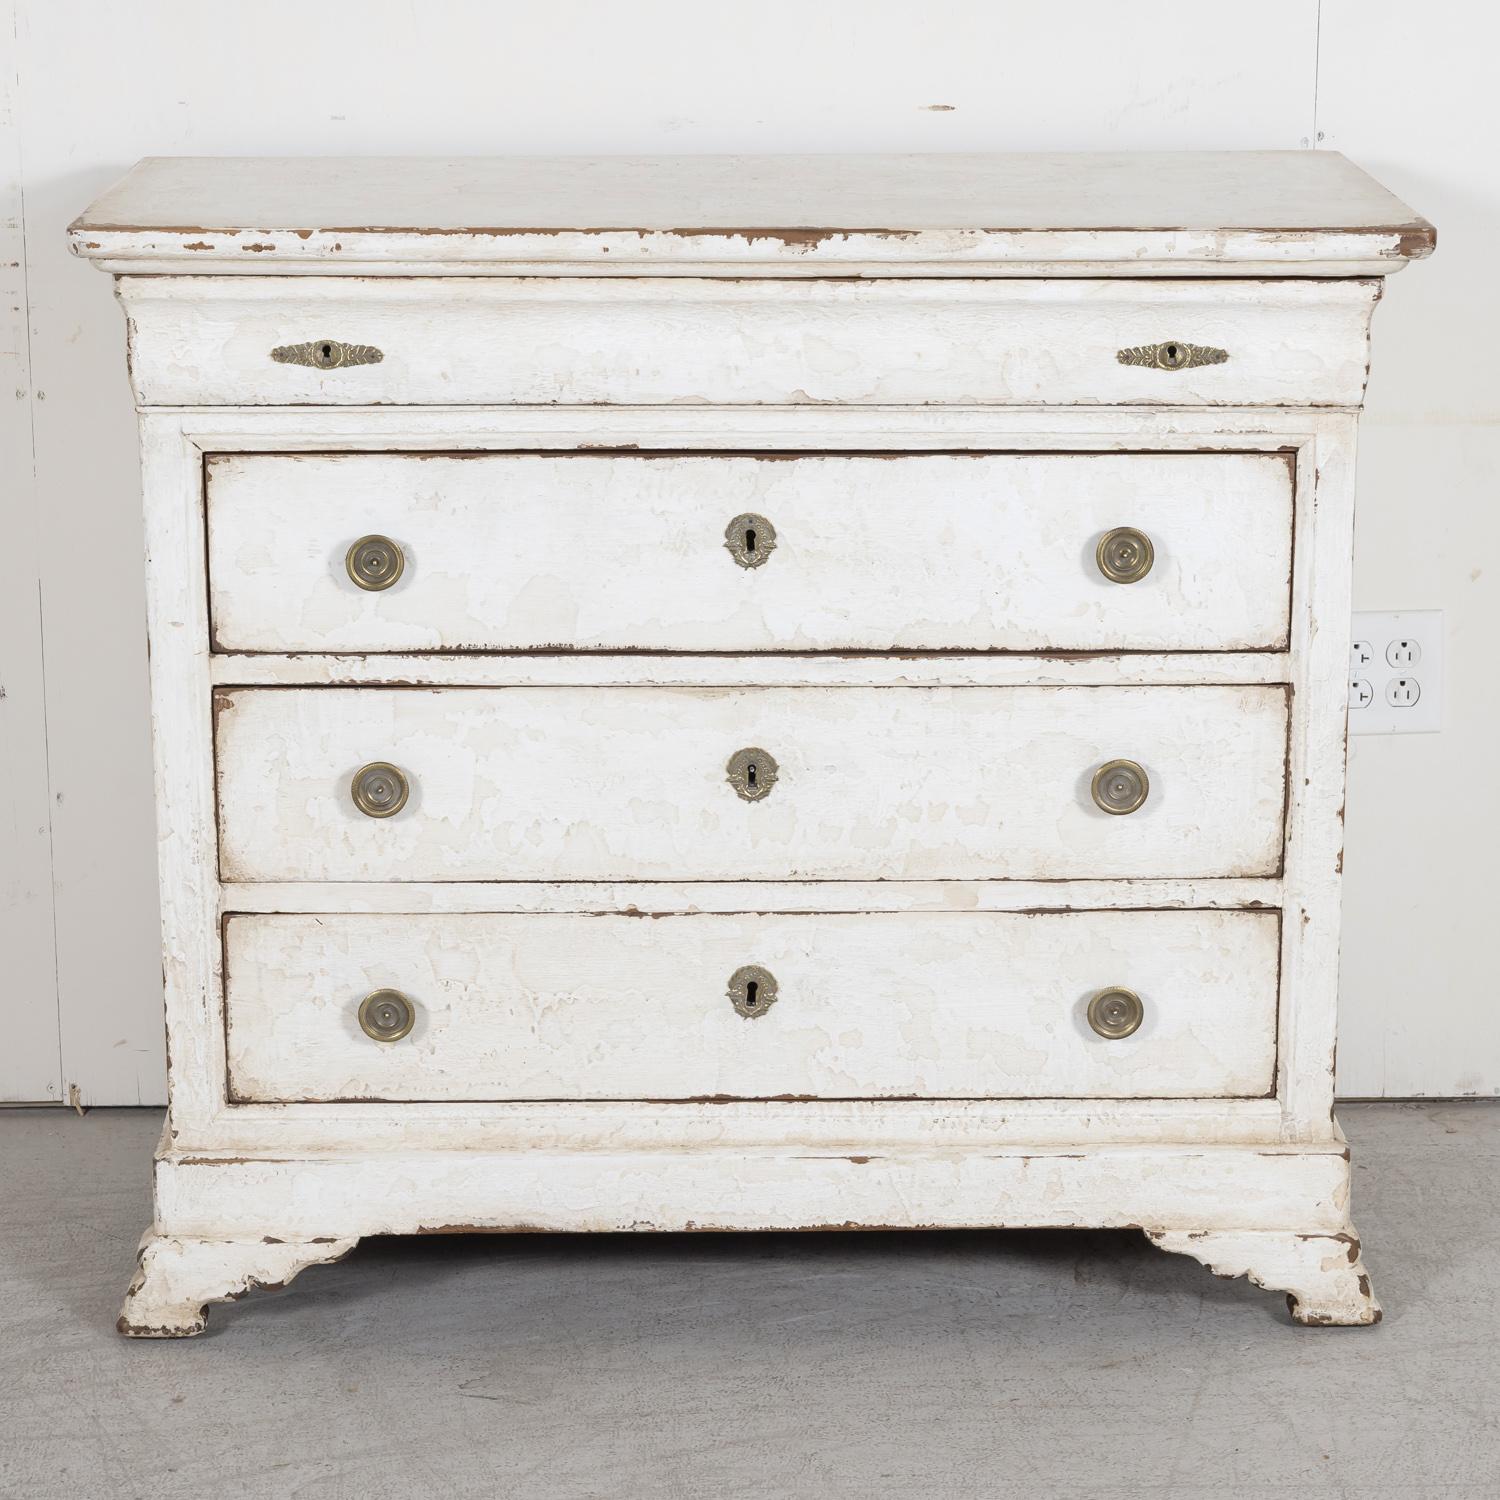 A 19th century French Louis Philippe style hand painted four-drawer commode from Uzes, a captivating village in the Occitane region of Southern France, circa 1880s. This antique French chest of drawers features a beveled plank top above a secret